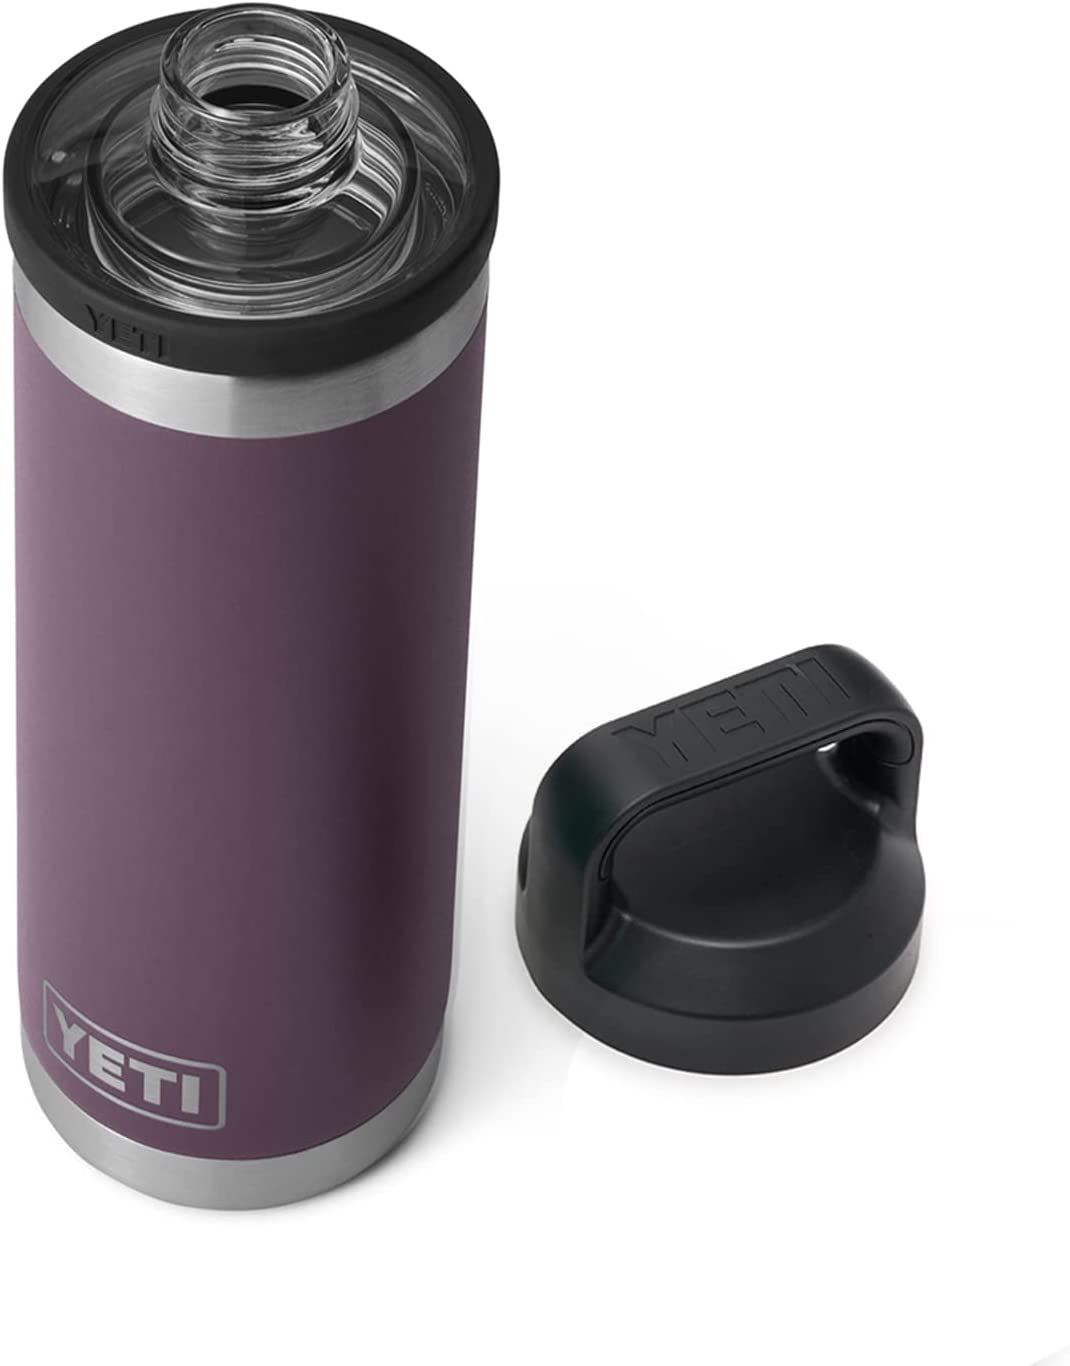 Best Valentine's Day Gifts for Her: Yeti water bottle